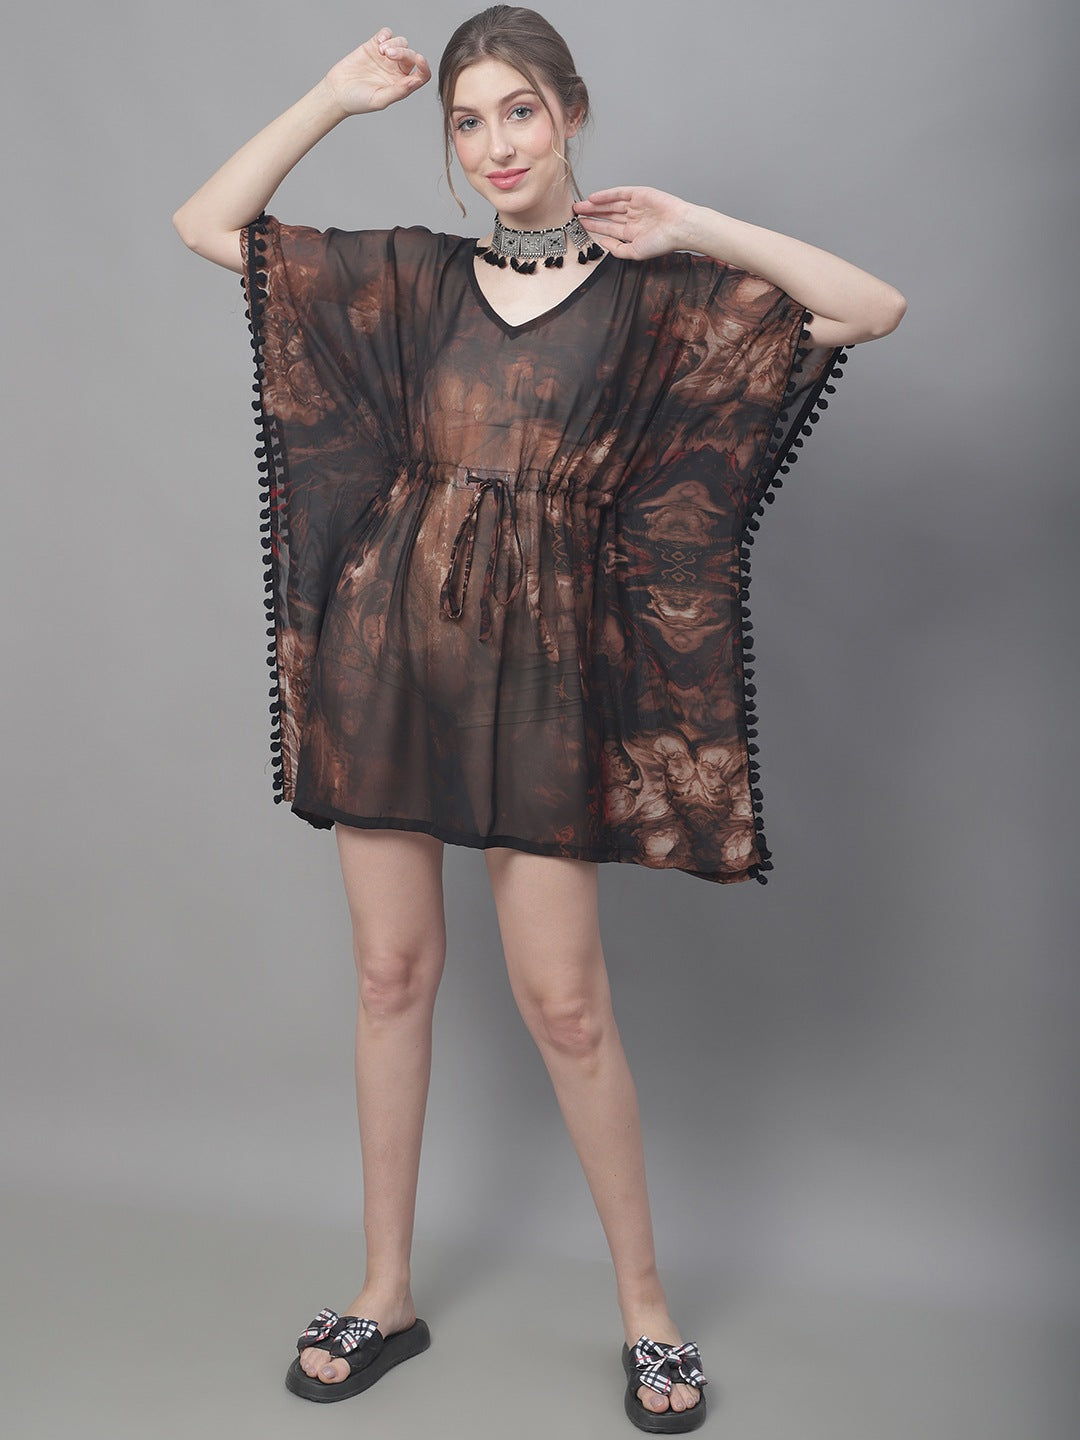 Brown Color Abstract Printed Georgette Coverup Beachwear Kaftan For Woman Claura Designs Pvt. Ltd. Kaftan Beachwear, brown, Coverup, kaftan, kaftan_freesize, Printed, Swimwear, V-Neck